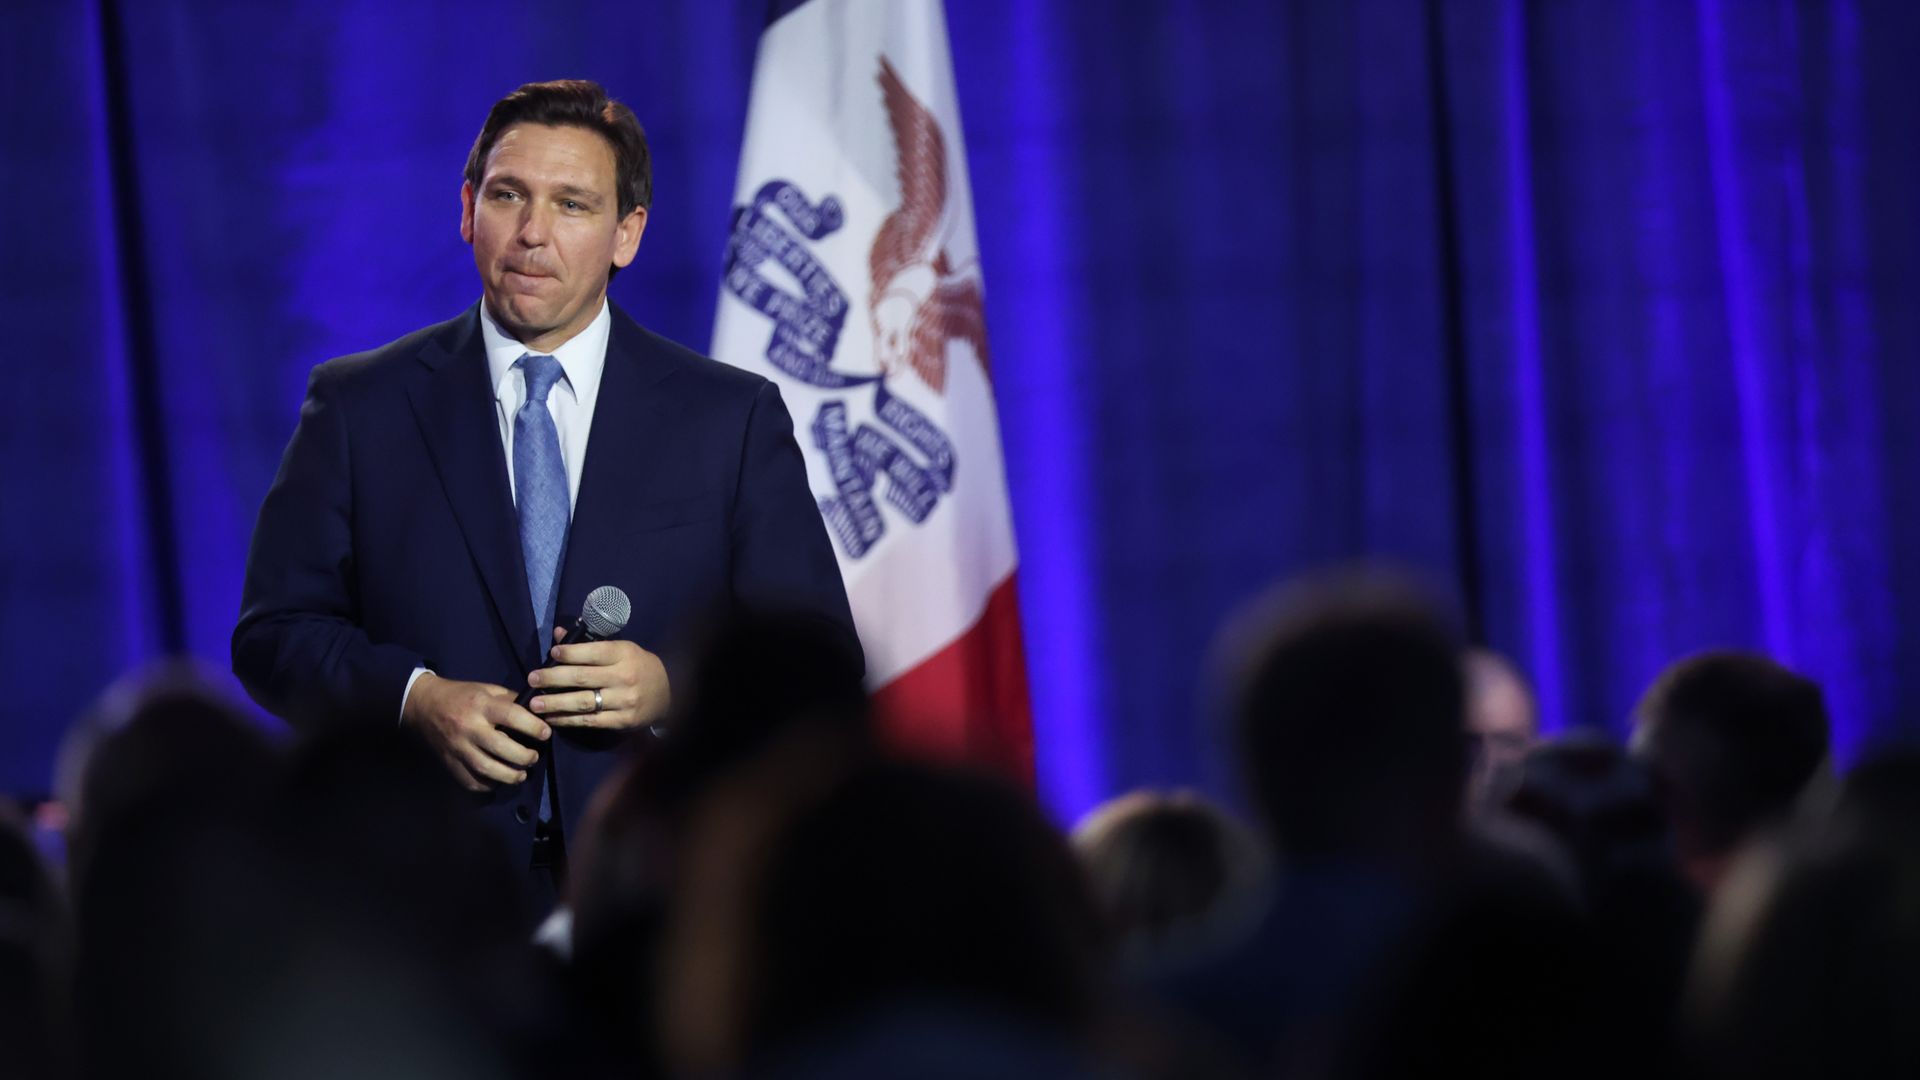 Florida Gov. Ron DeSantis speaks to Iowa voters during an event at the Iowa State Fairgrounds on March 10, 2023